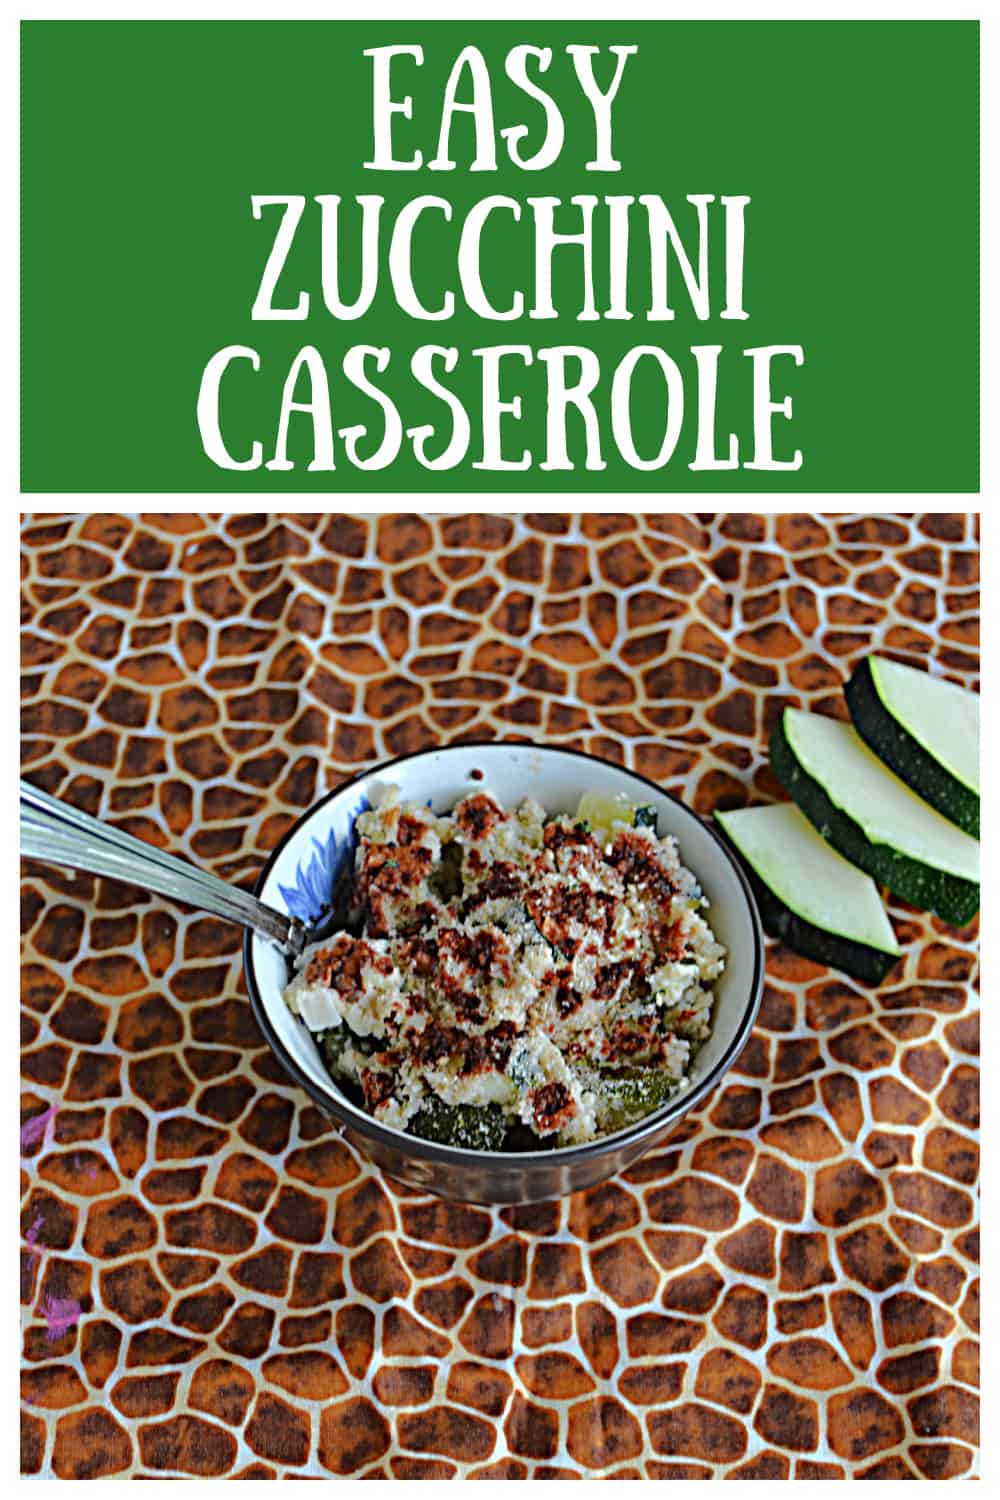 Pin Image: Text title, A bowl of zucchini casserole with a spoon in it.